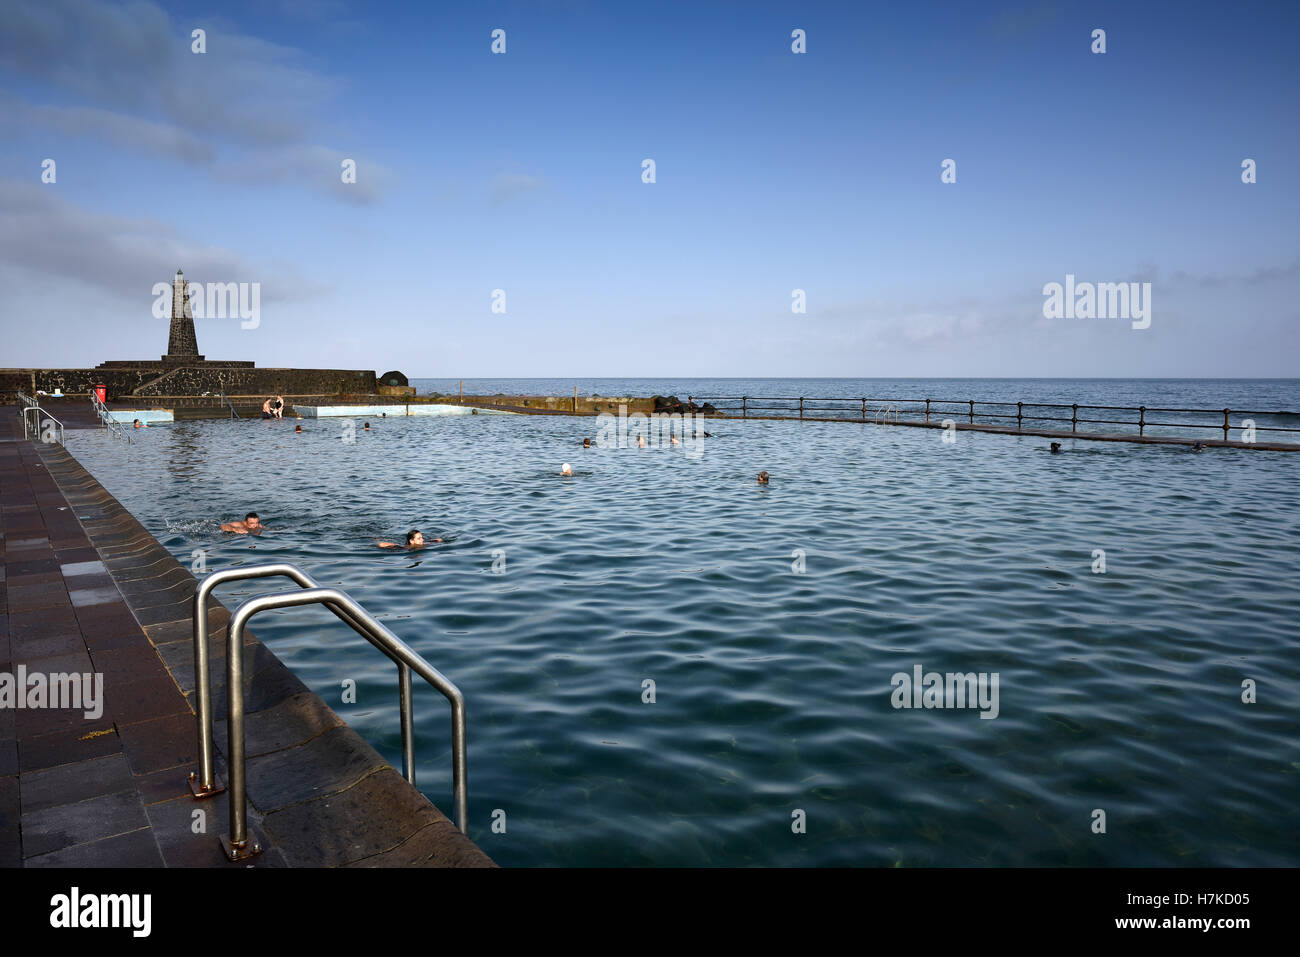 Natural seawater pool with Bajamar Lighthouse, piscinas naturales, Bajamar Lighthouse, Tenerife, Canary Islands, Spain Stock Photo